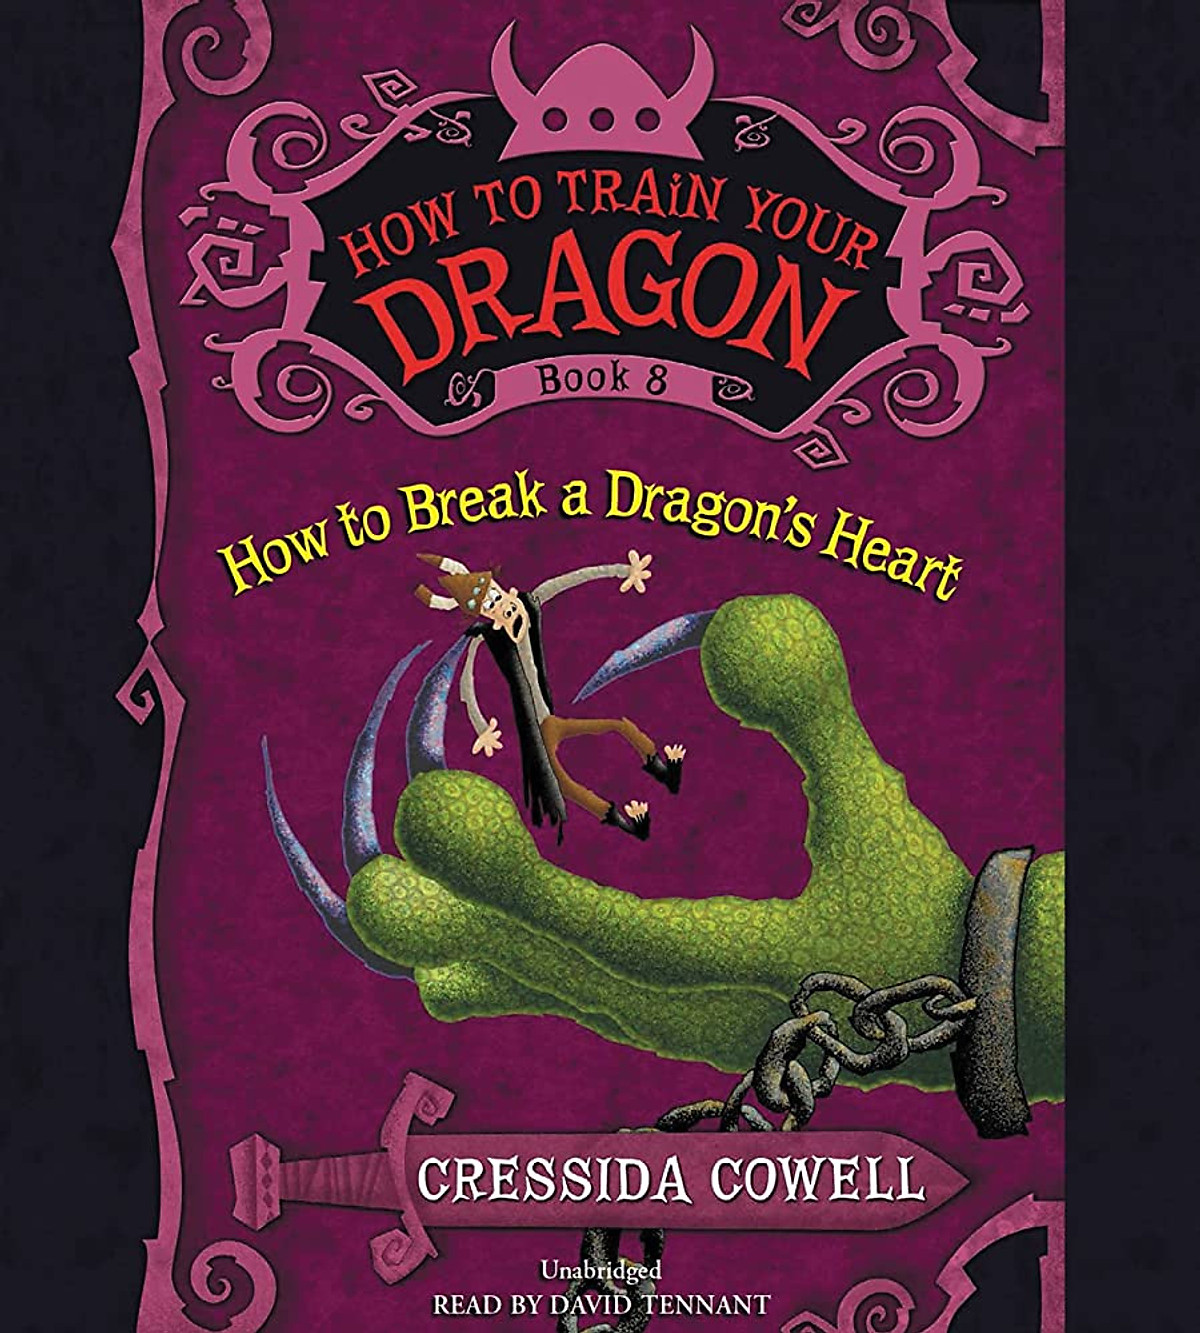 How to Train Your Dragon Book 8: How to Break a Dragon's Heart